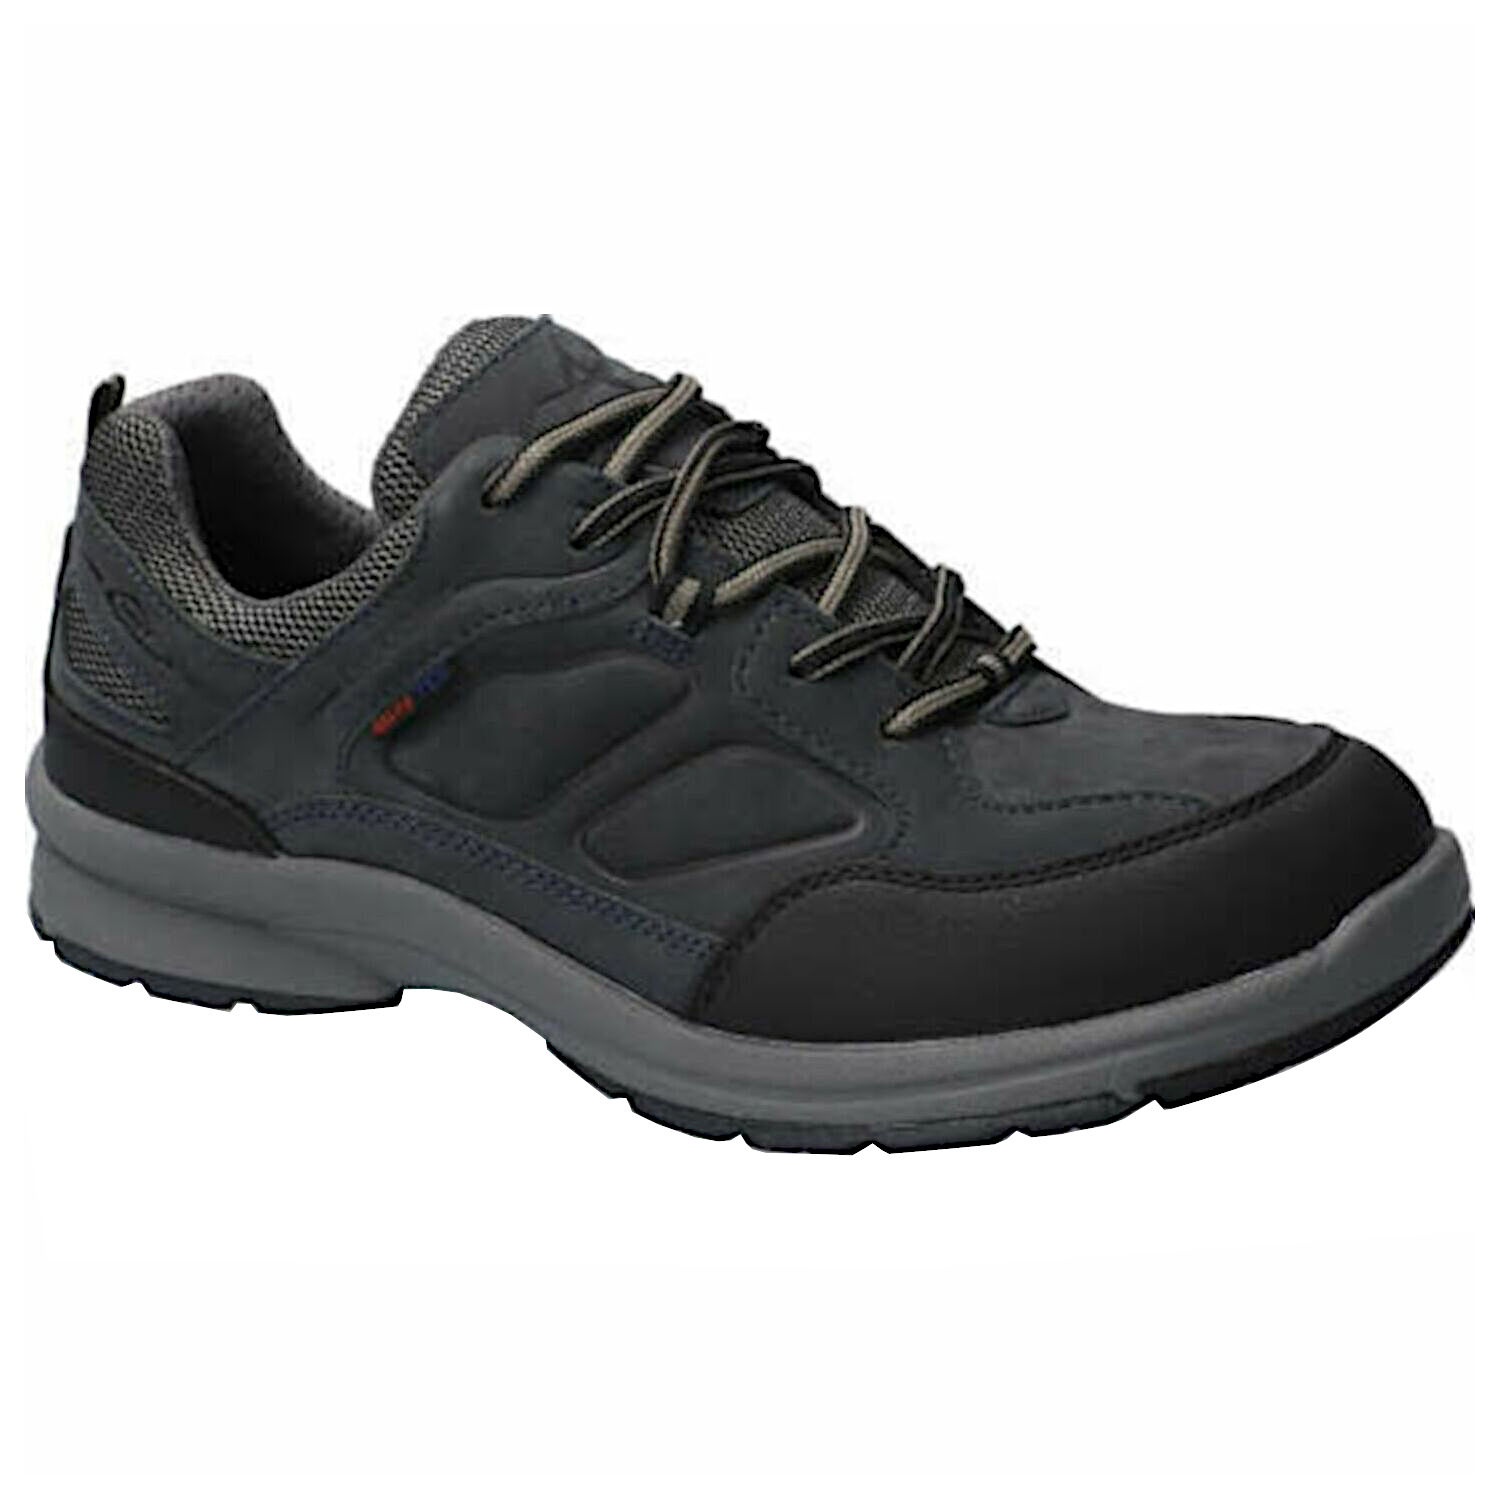 All Rounder Mens Caletto Black Nubuck Trainers 10.5 US